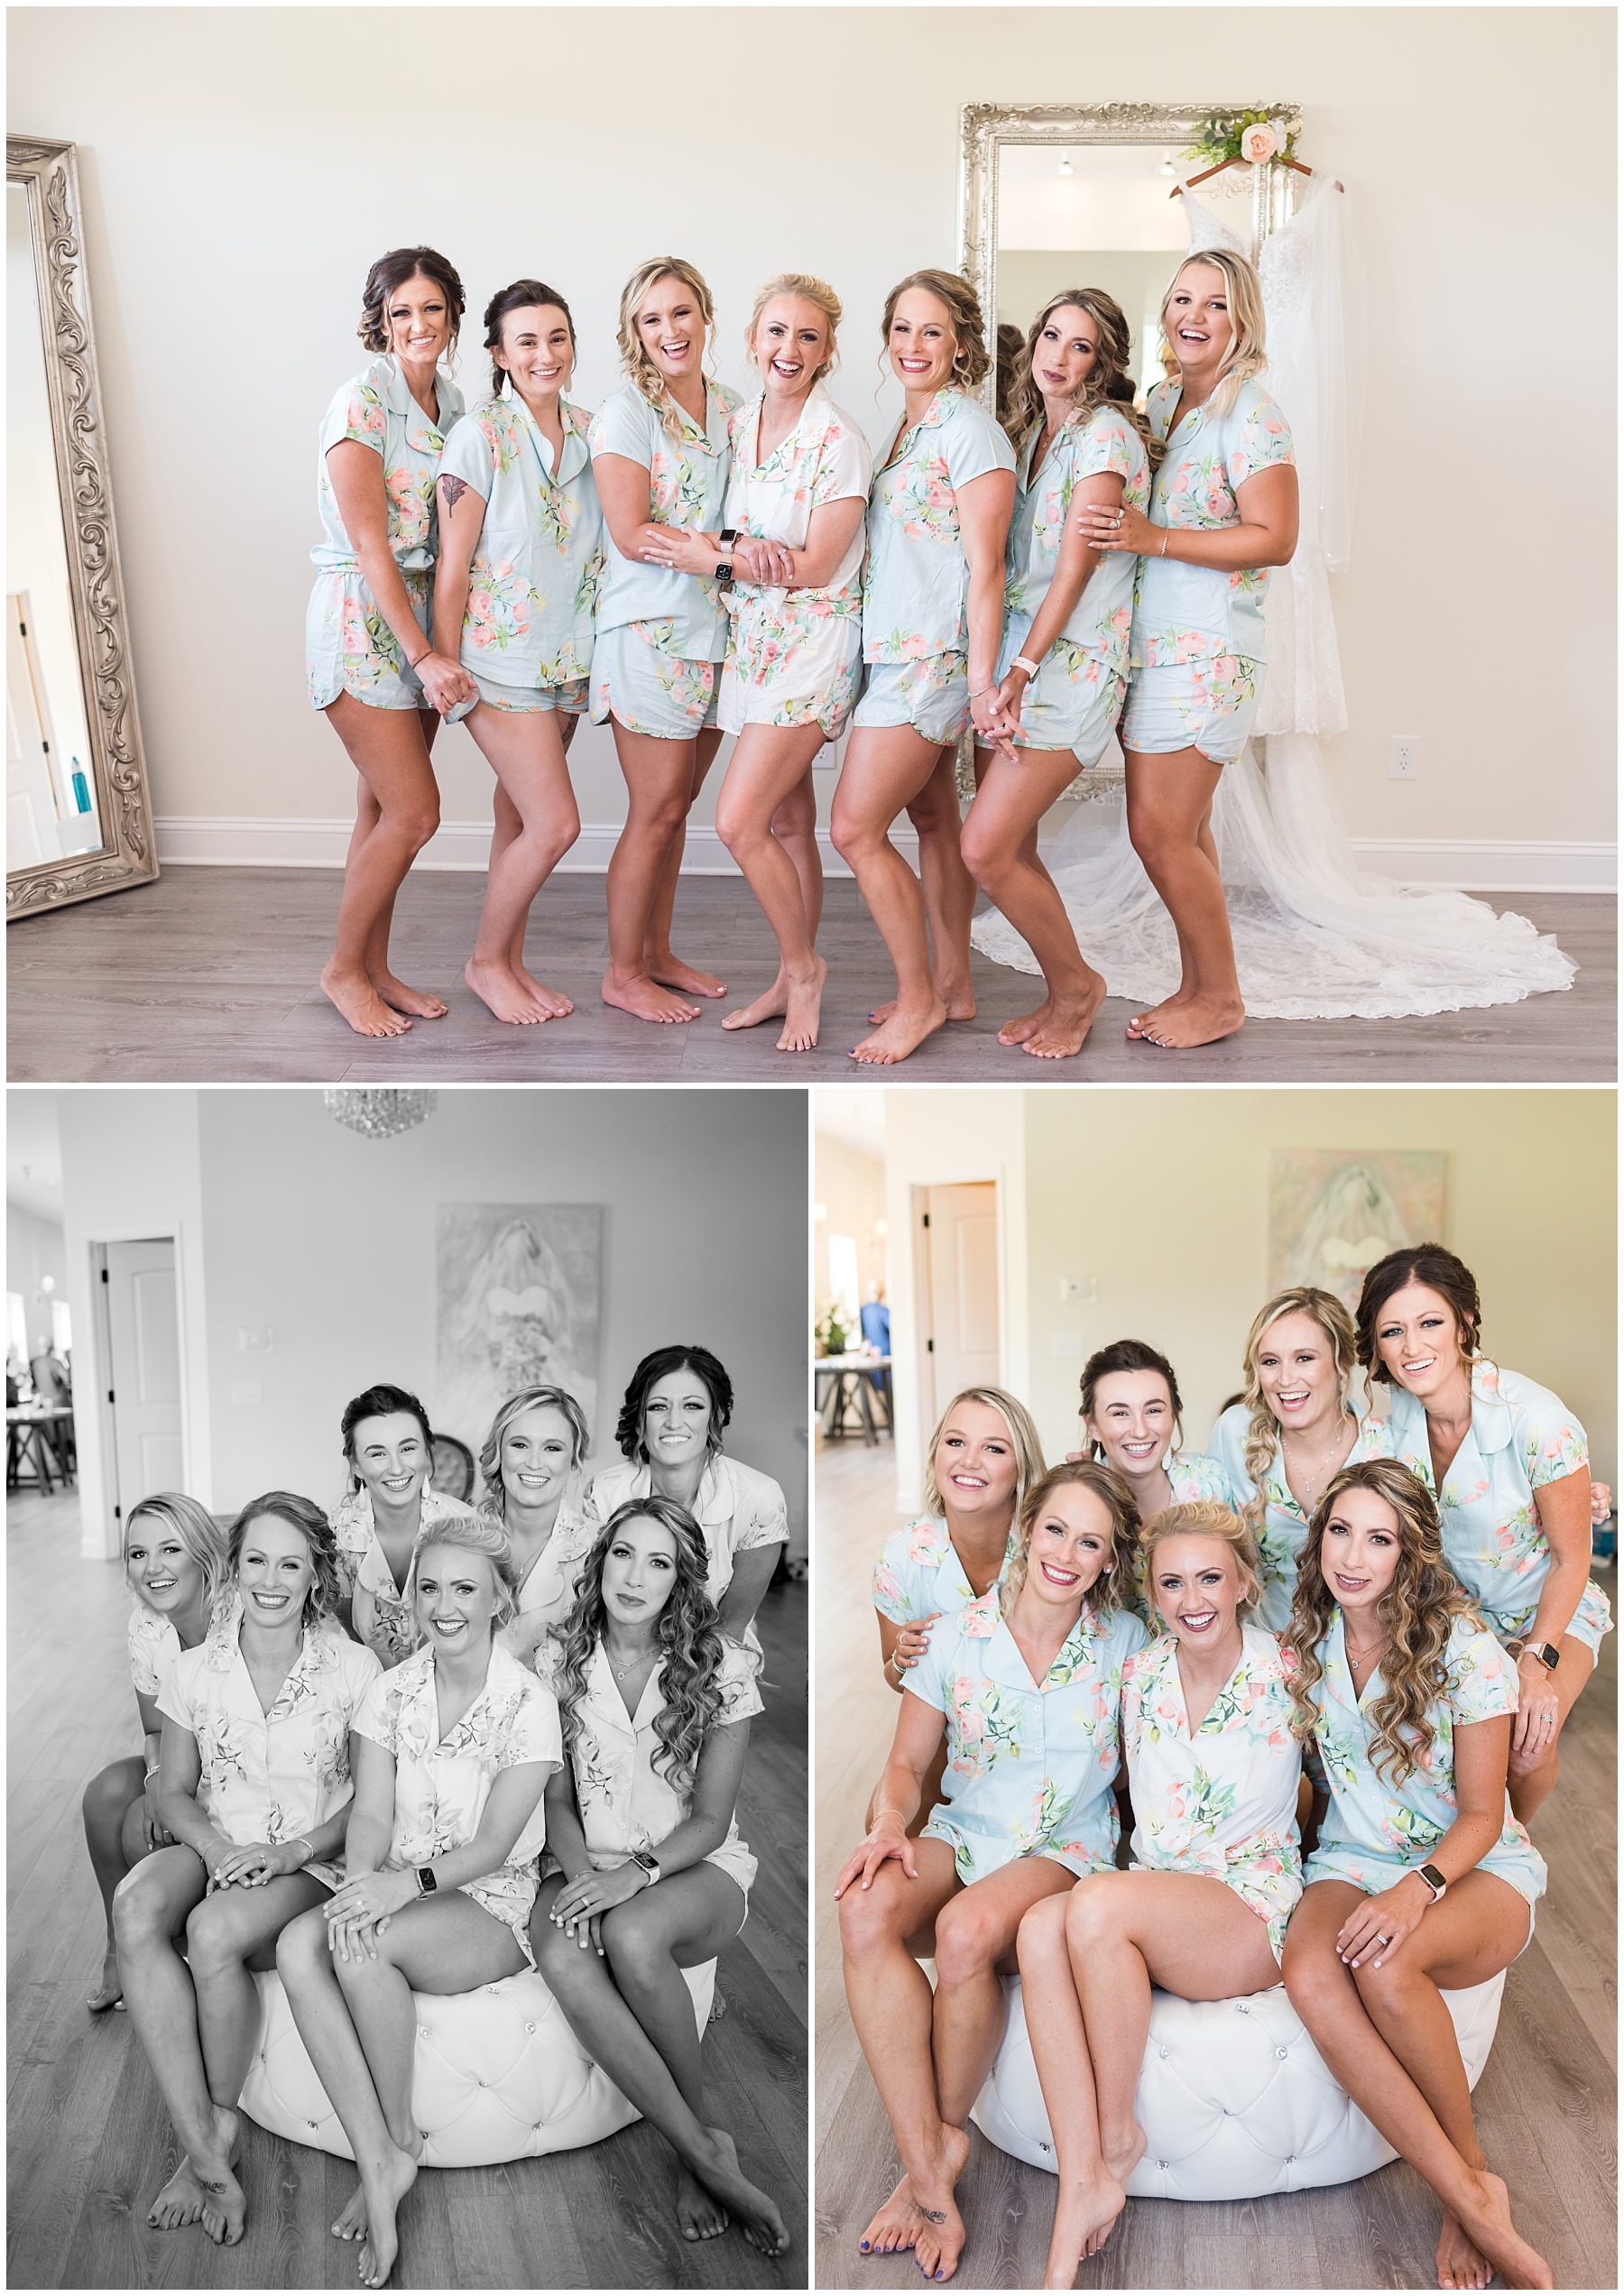 Bride and Bridesmaids posing in their matching pjs on the wedding day at Tucker's Gap Event Center